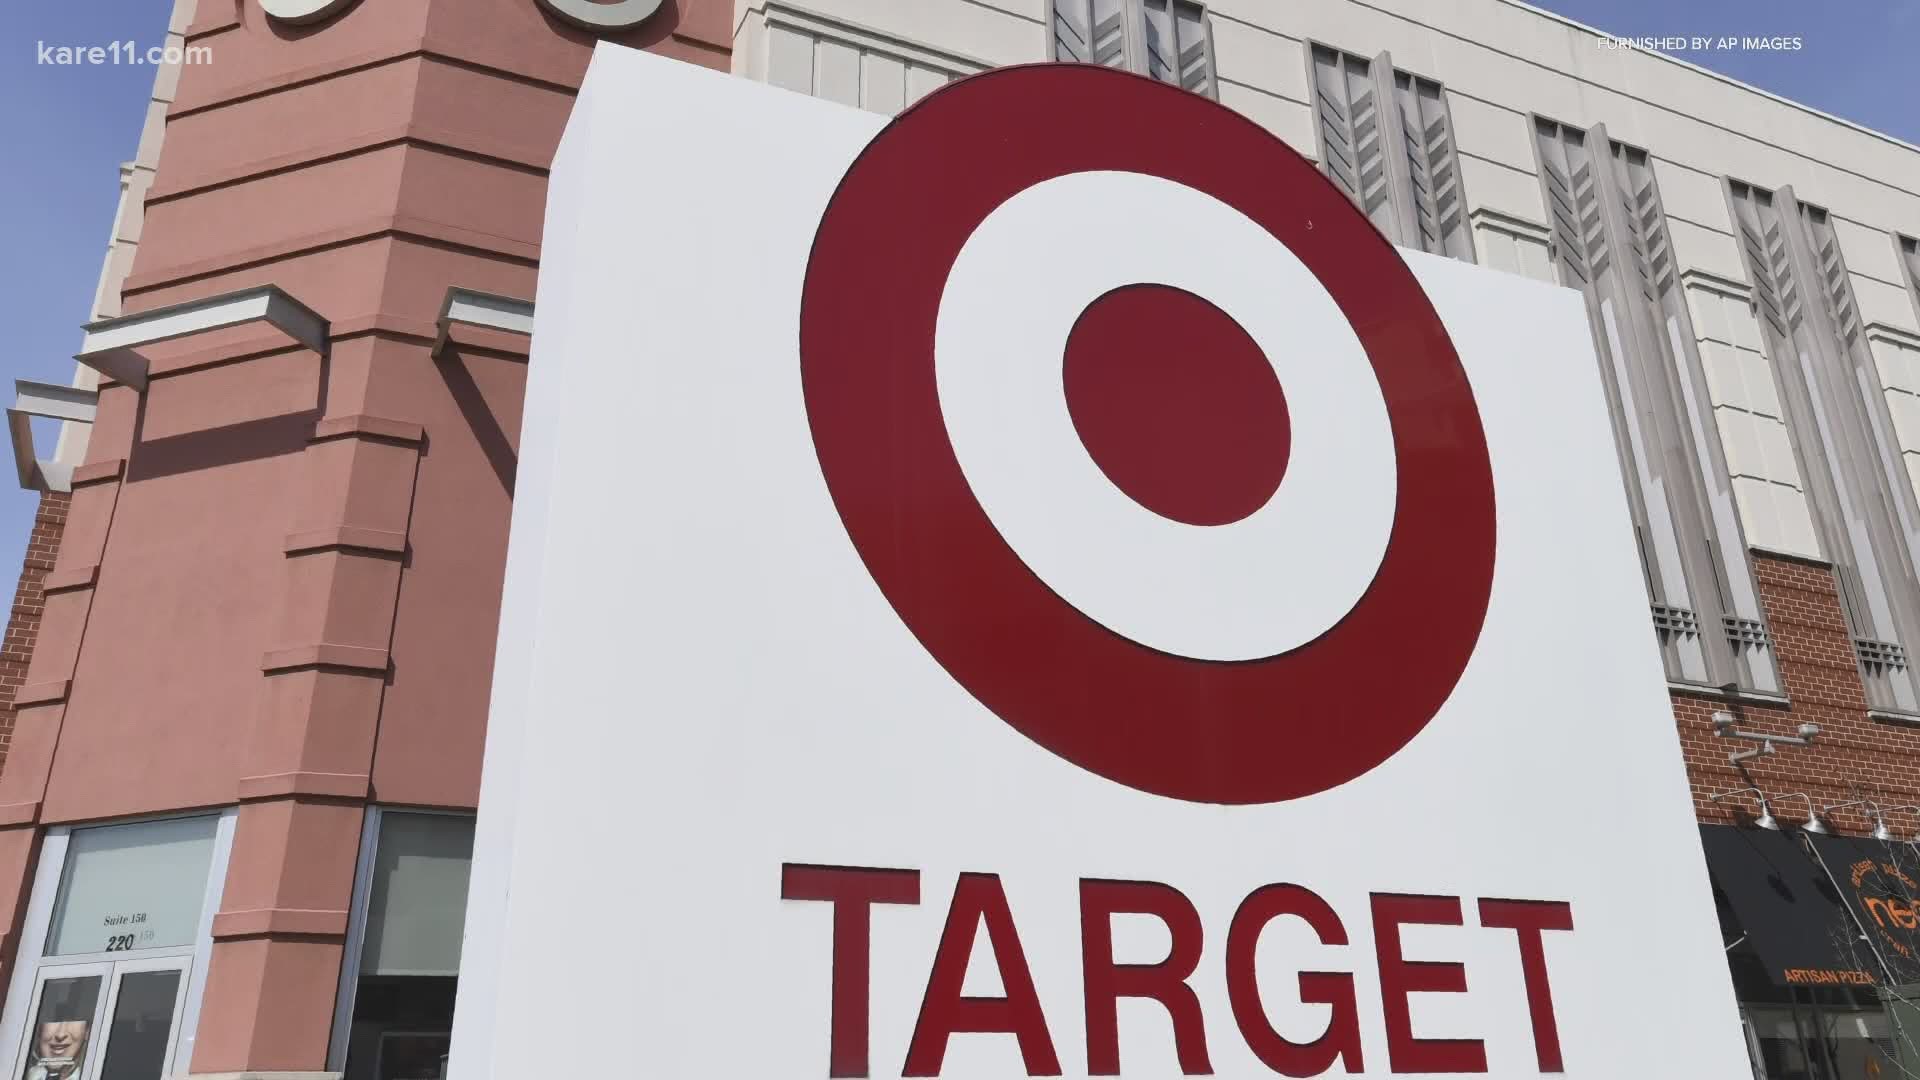 Target announced Monday it will close its stores on Thanksgiving and will start offering holiday deals in October.